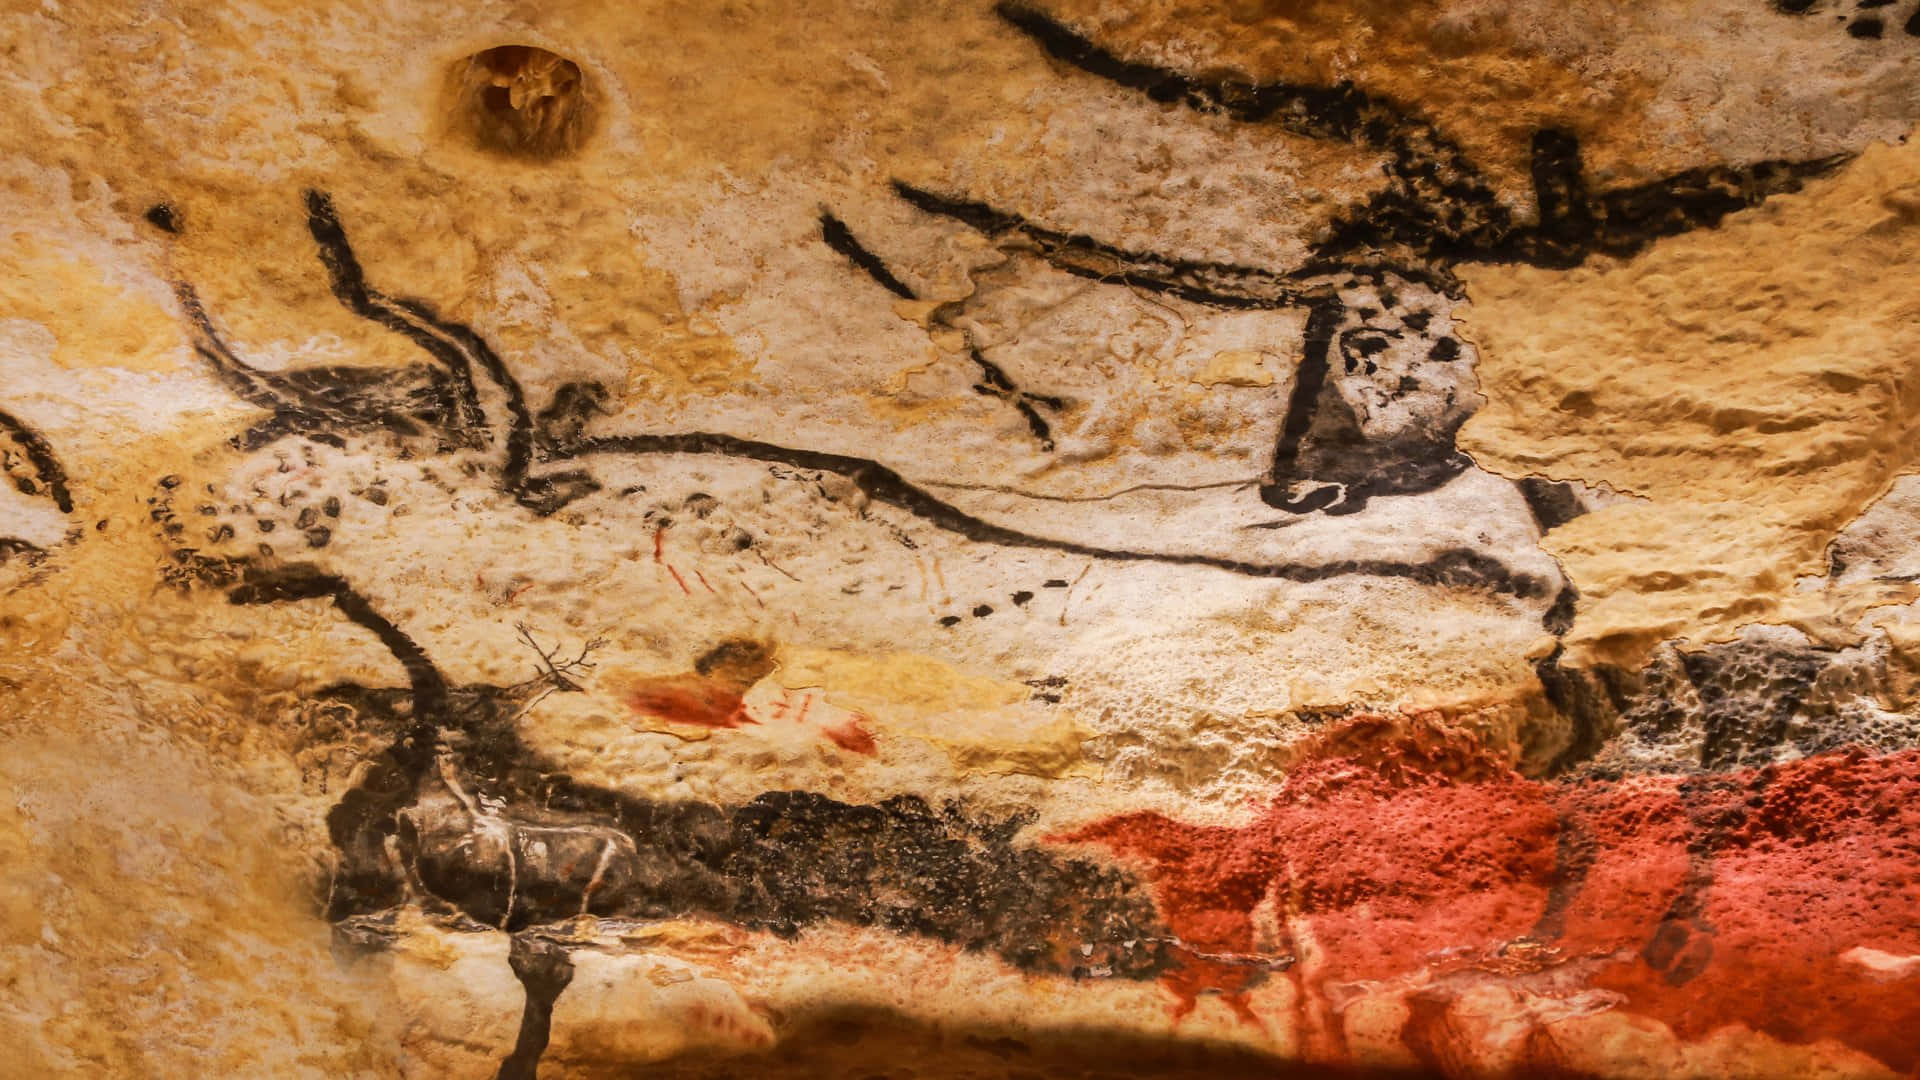 Awe-inspiring Ancient Art of the Lascaux Caves Wallpaper